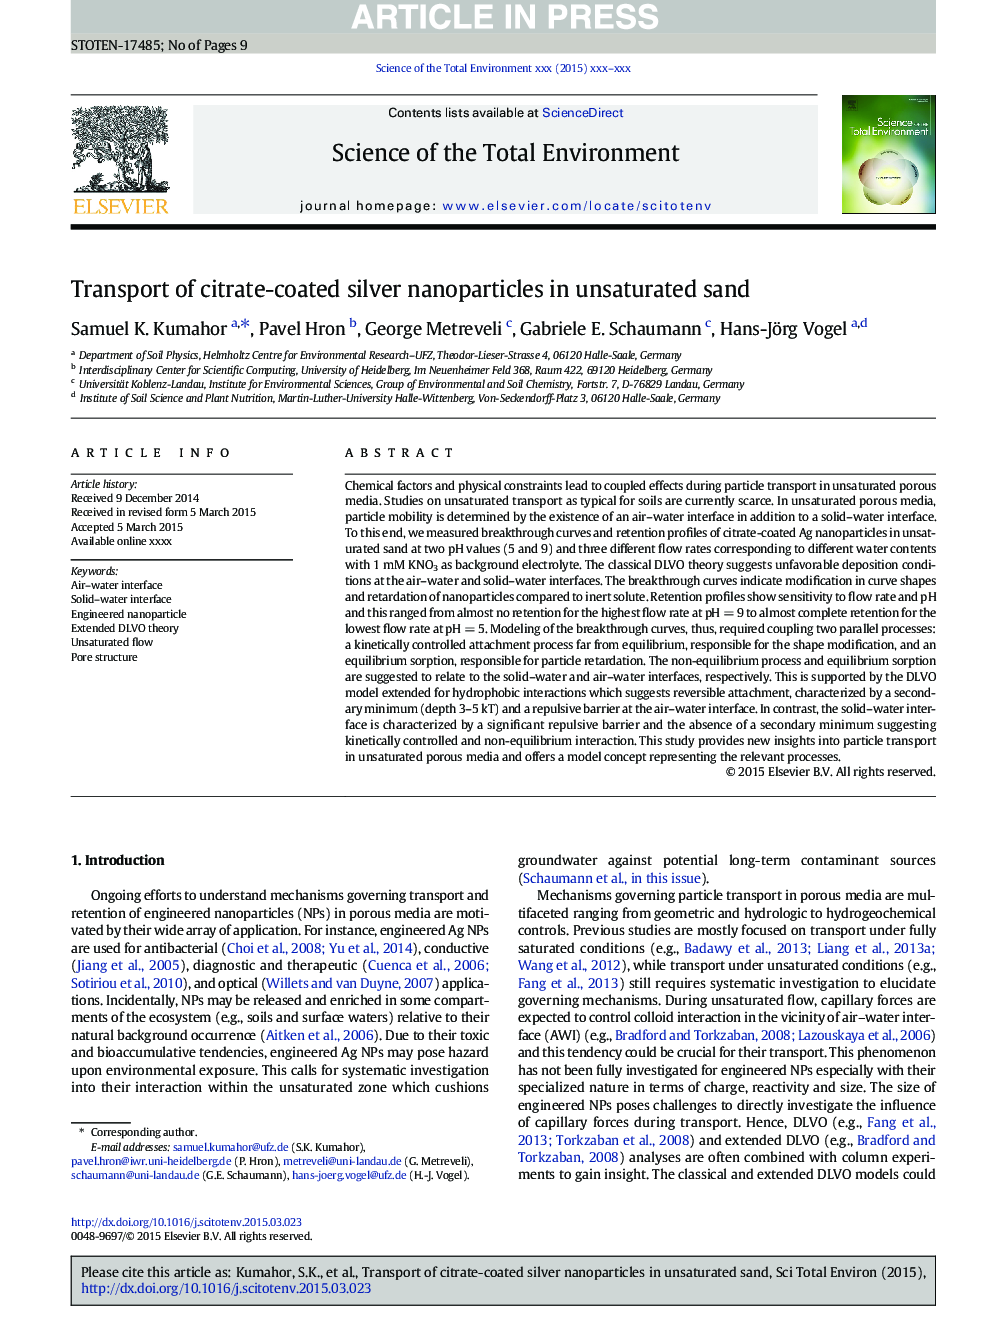 Transport of citrate-coated silver nanoparticles in unsaturated sand